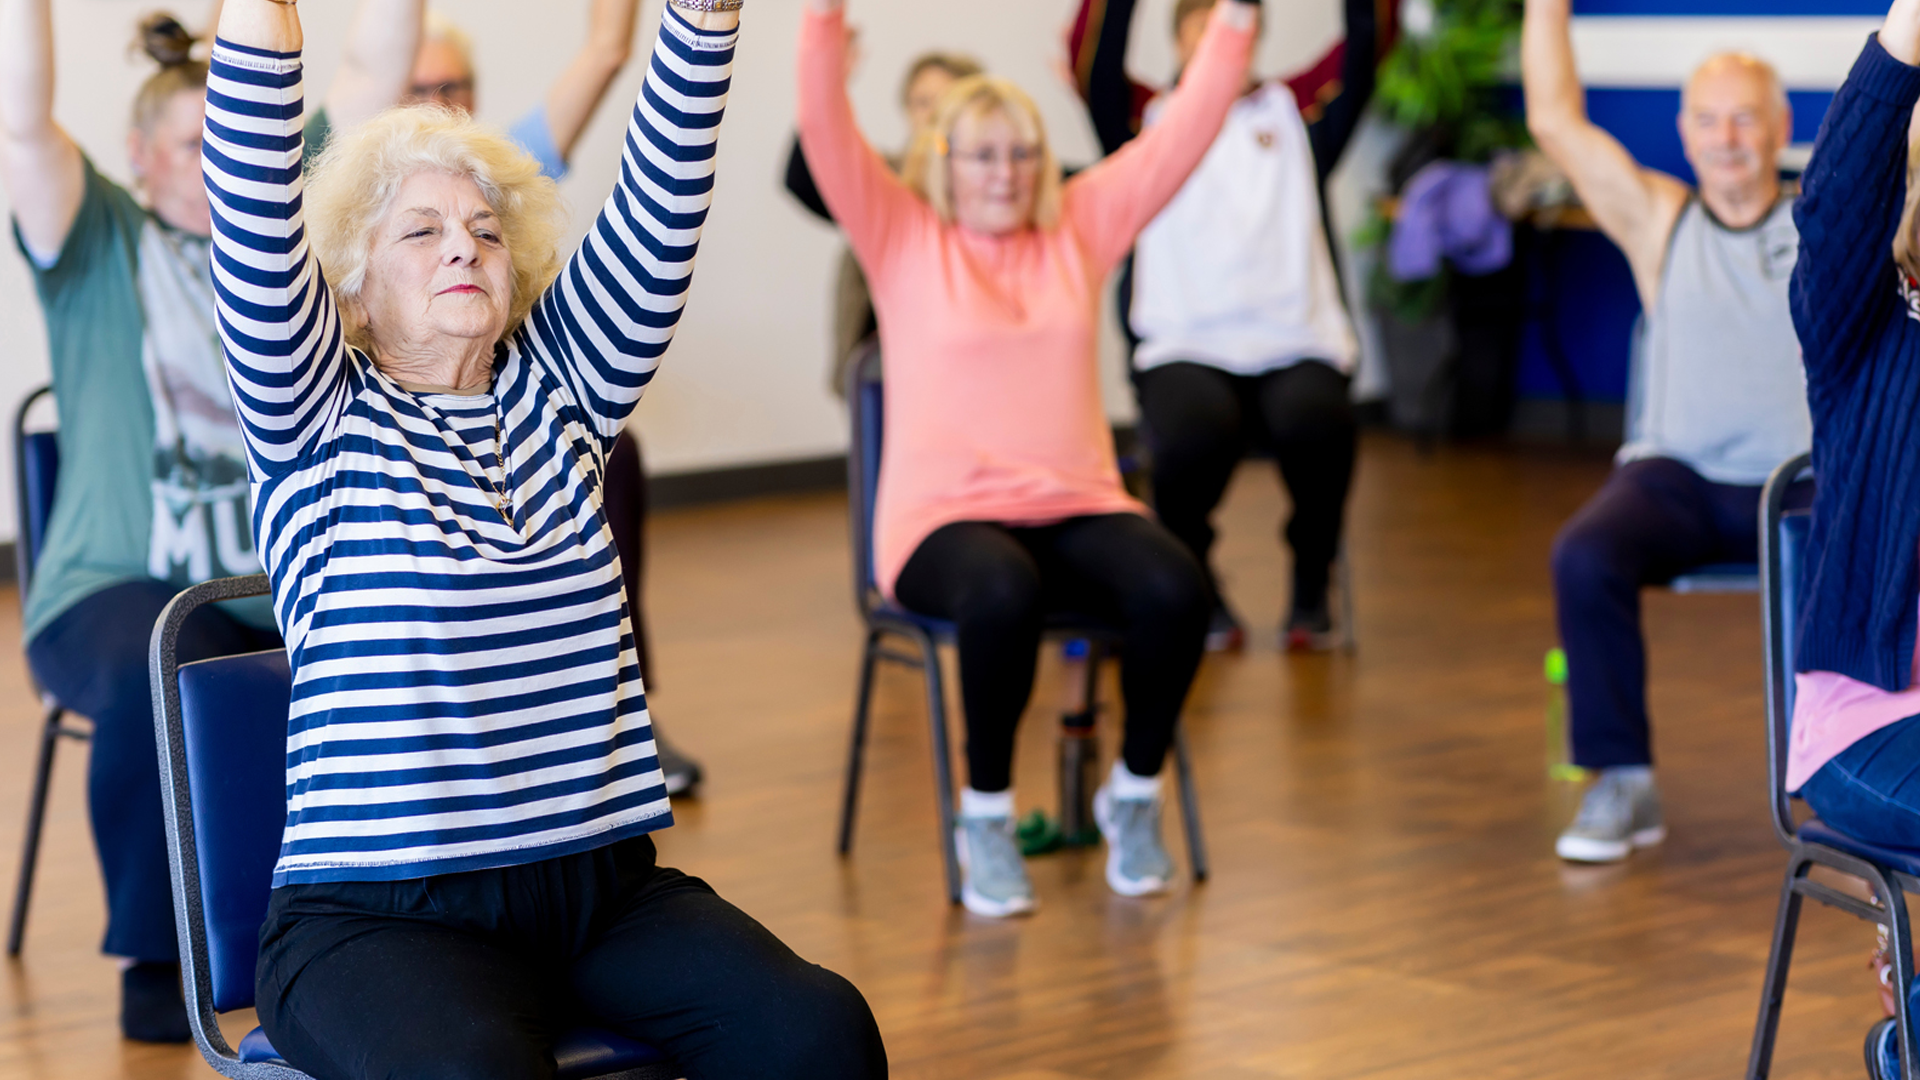 Several people sit on chairs in a village hall. They all raise their arms upwards,, stretching and exercising as part of a better balance session.